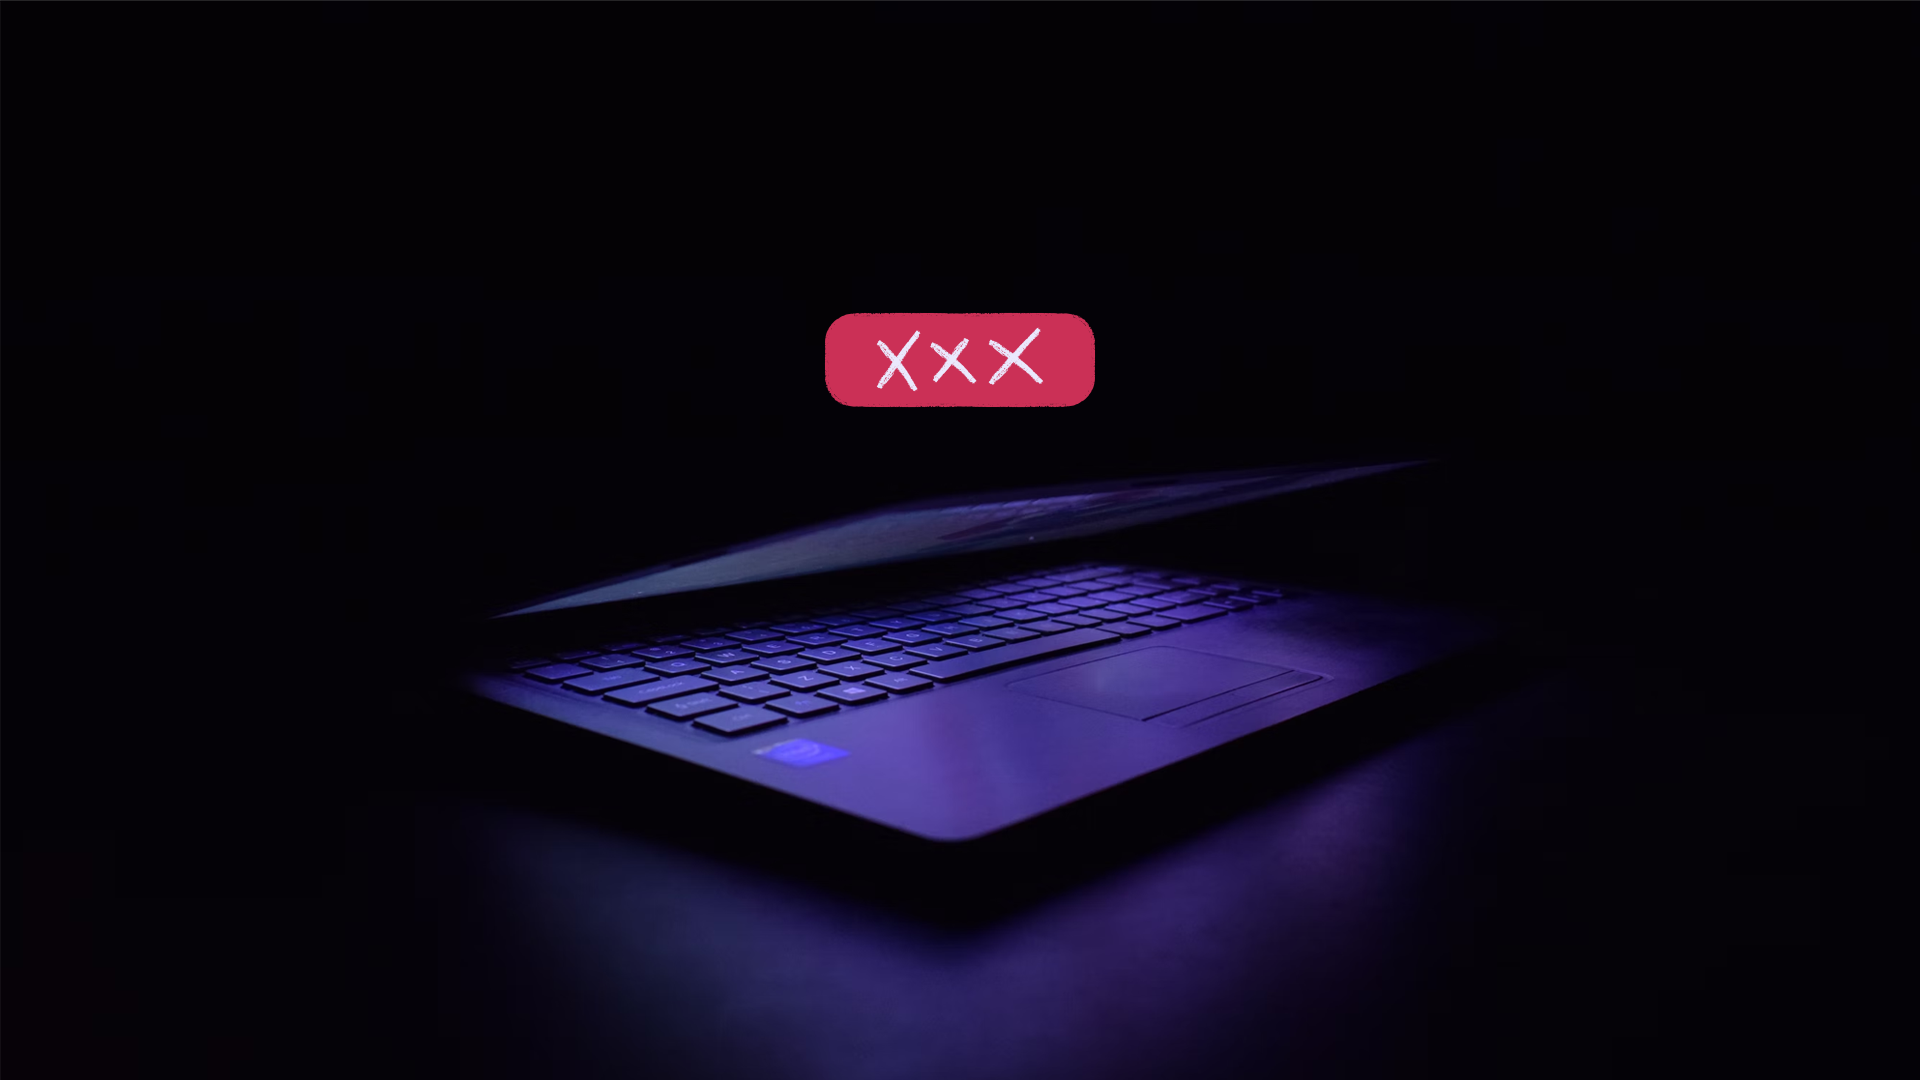 Laptop with xxx sign